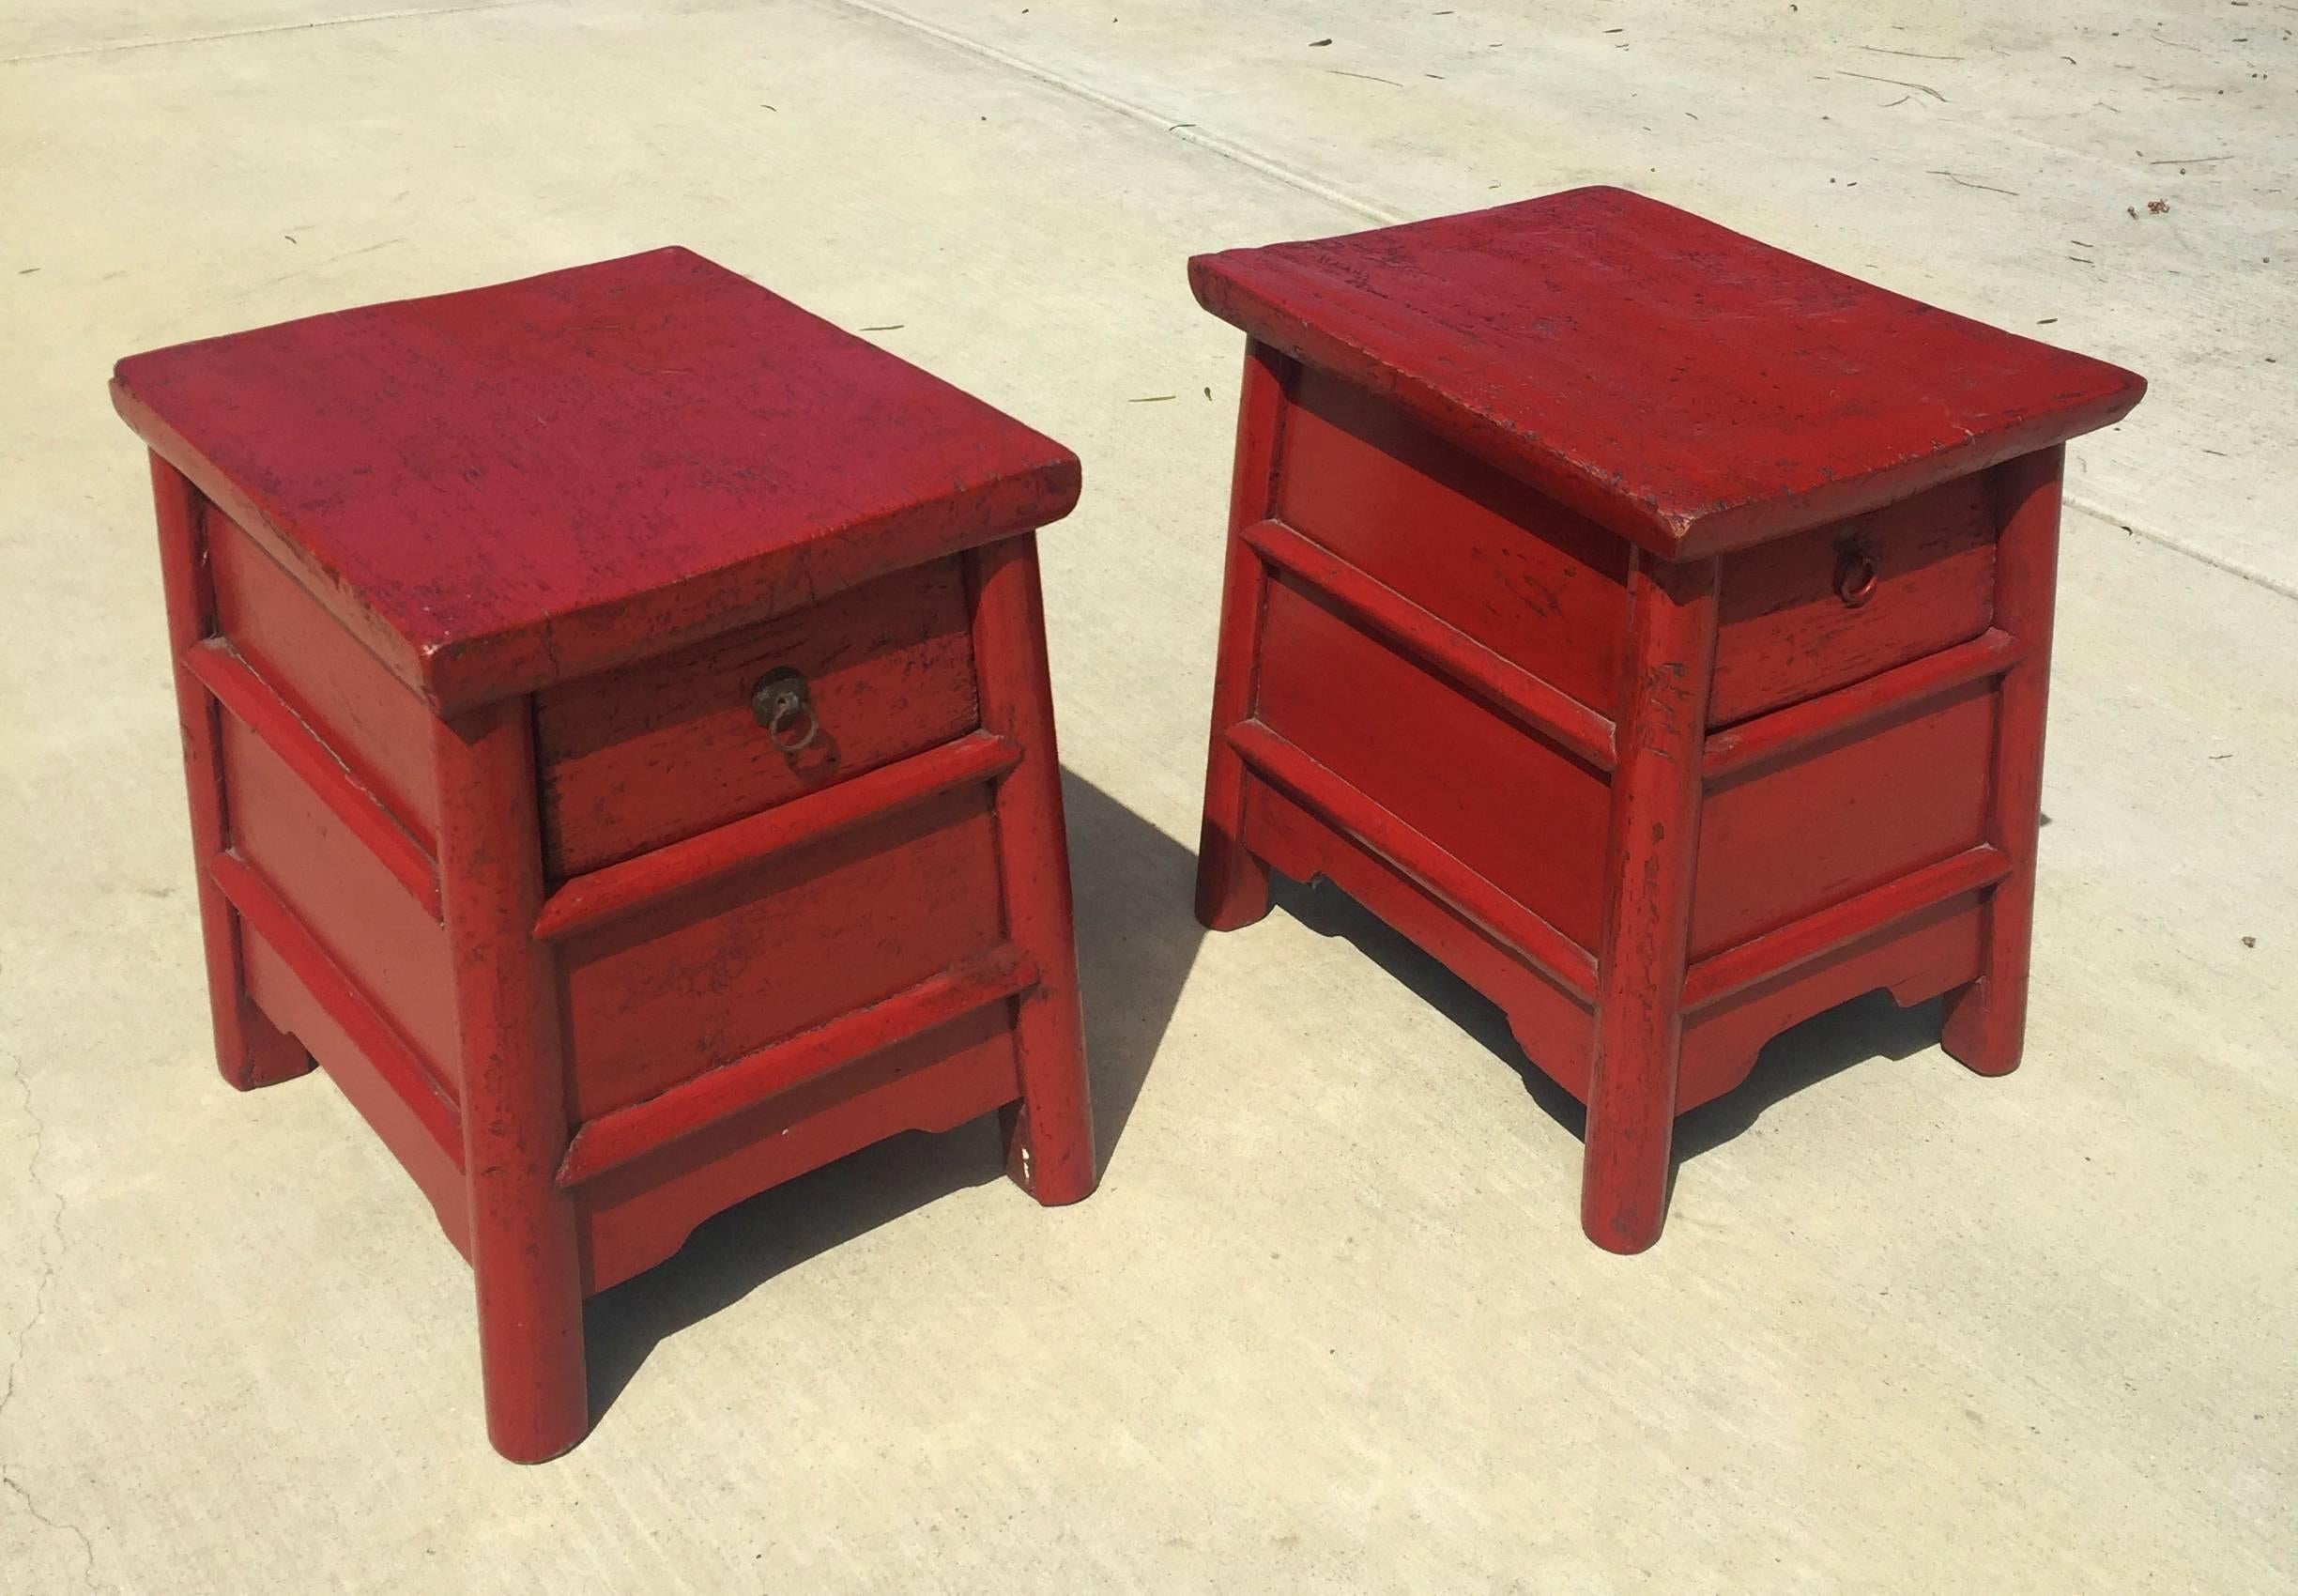 Lacquered Pair of 19th Century Red Lacquer Country Stools, Chinese Antique Stools